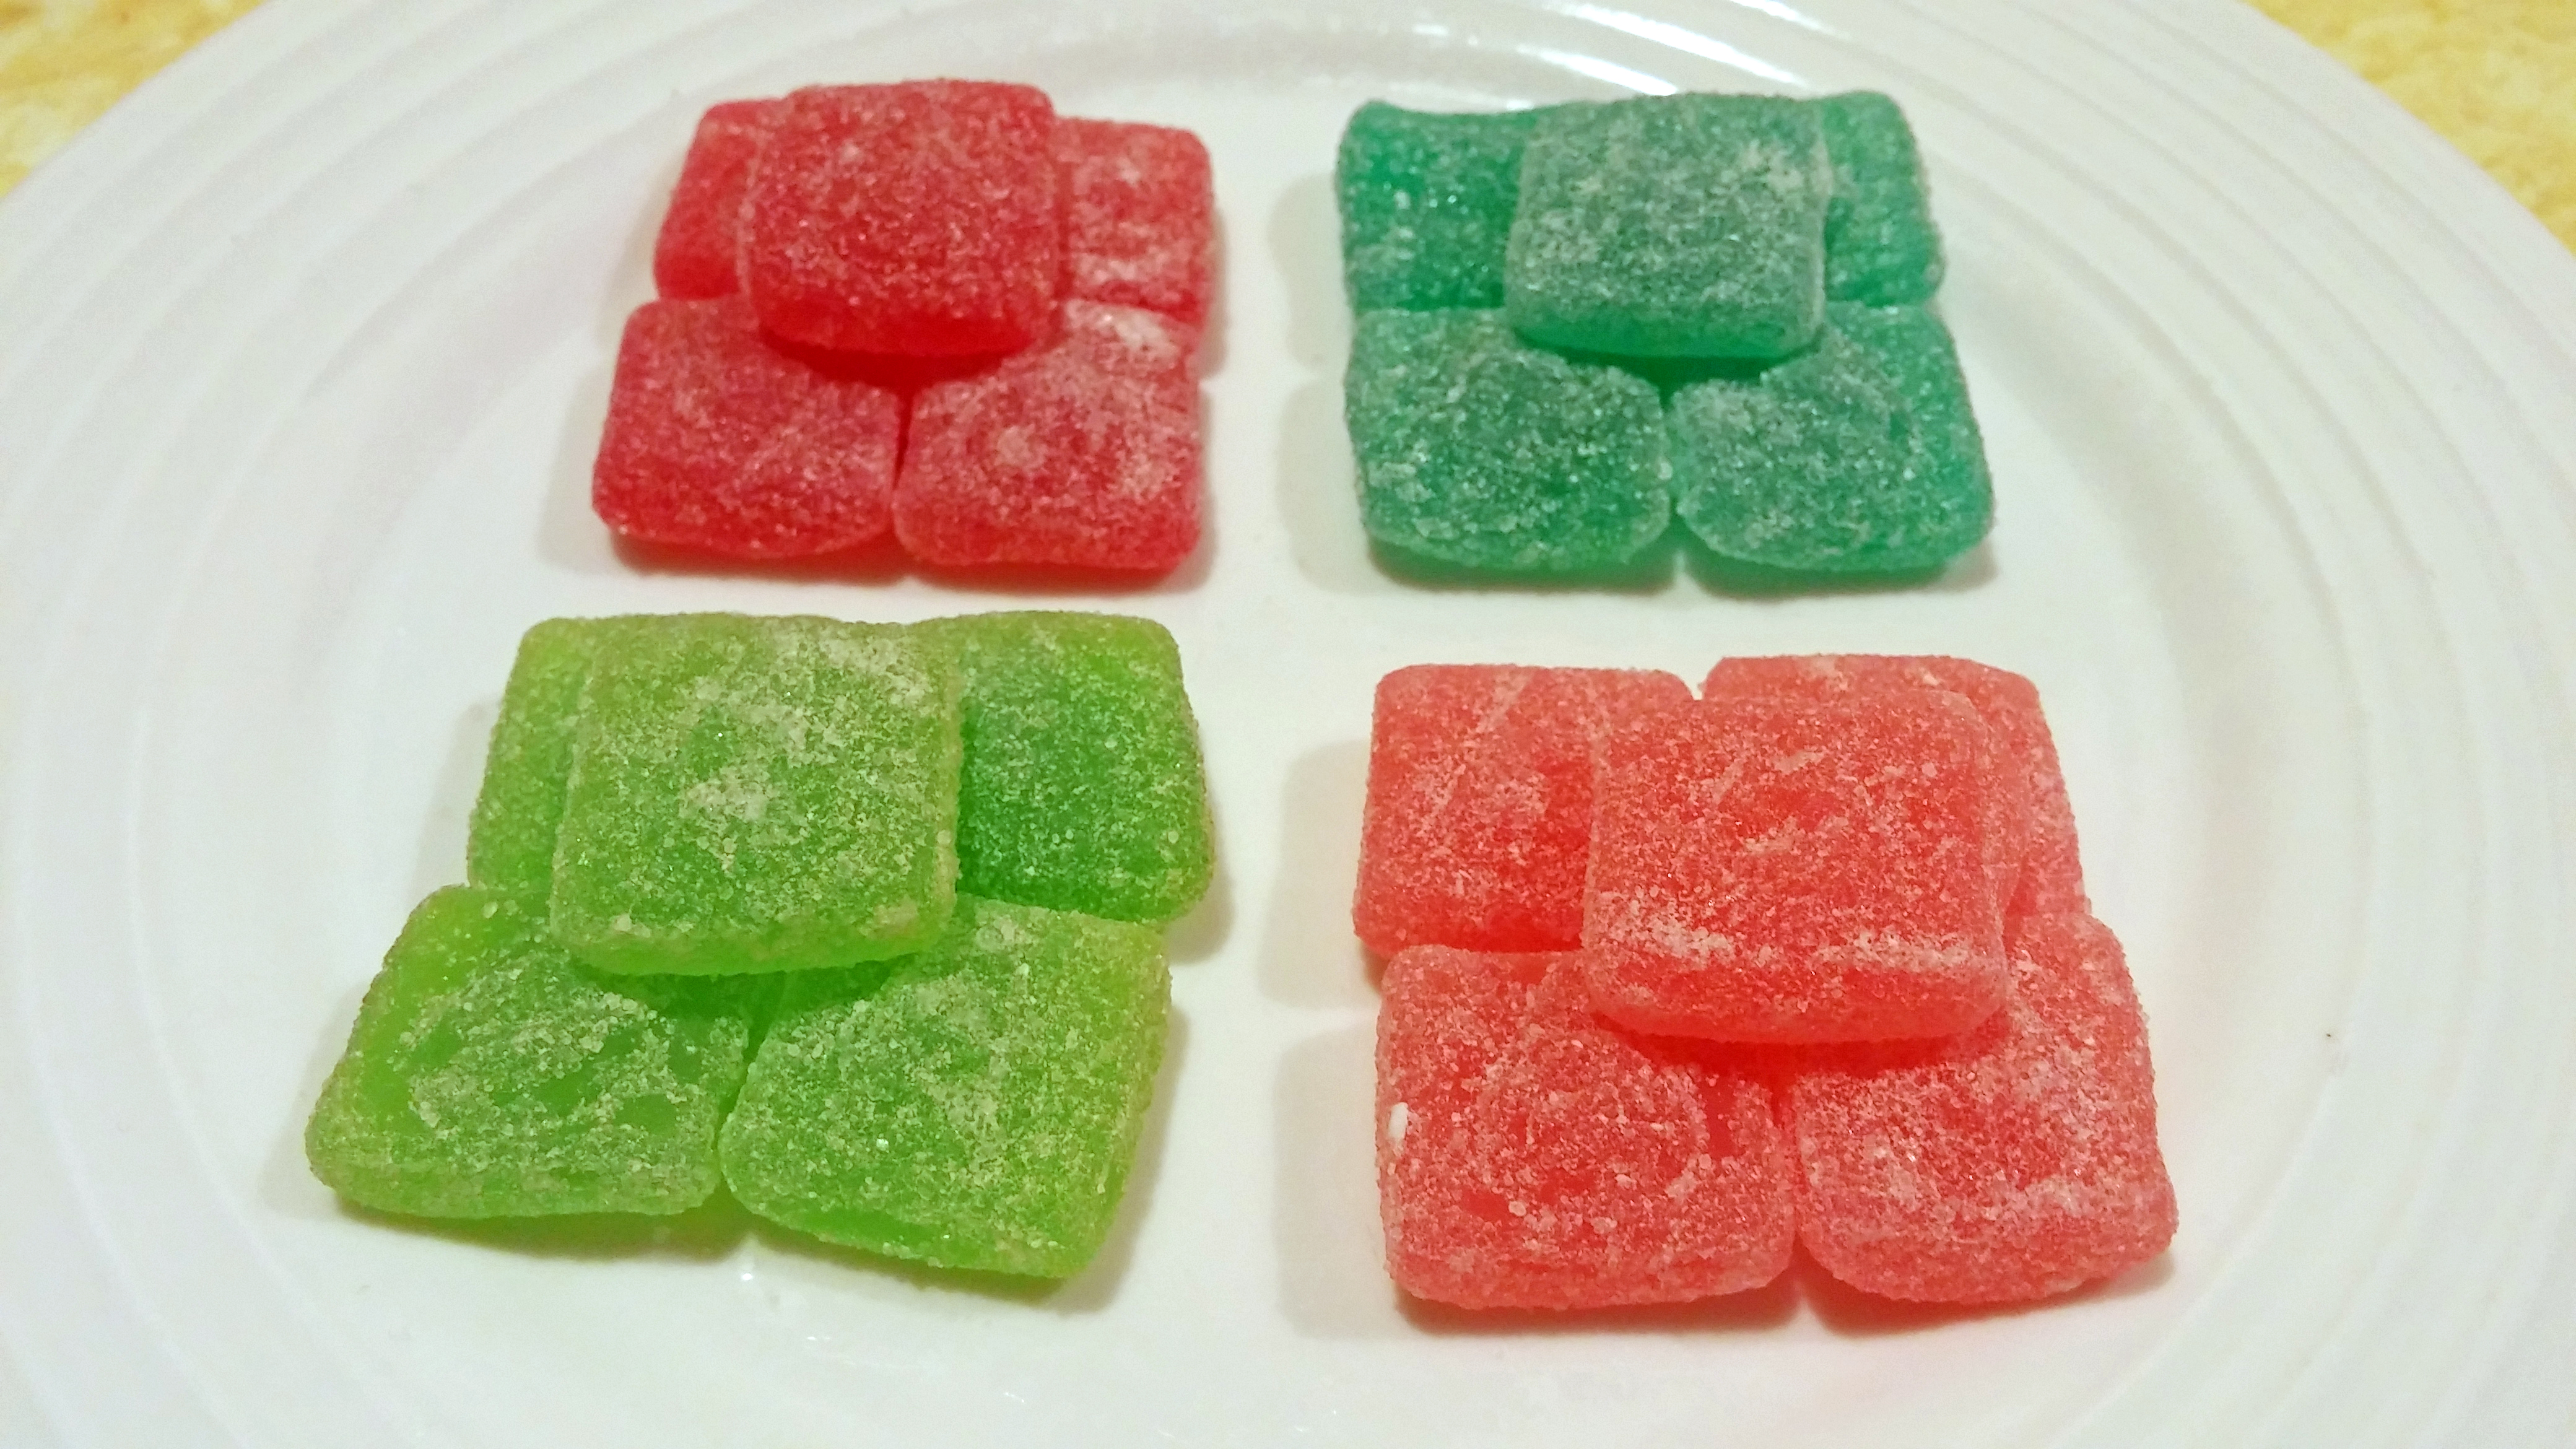 Sour Flavors (clockwise from top left): Cherry, Blue Raspberry, Strawberry and Watermelon. (Credit: CBSDetroit.com)